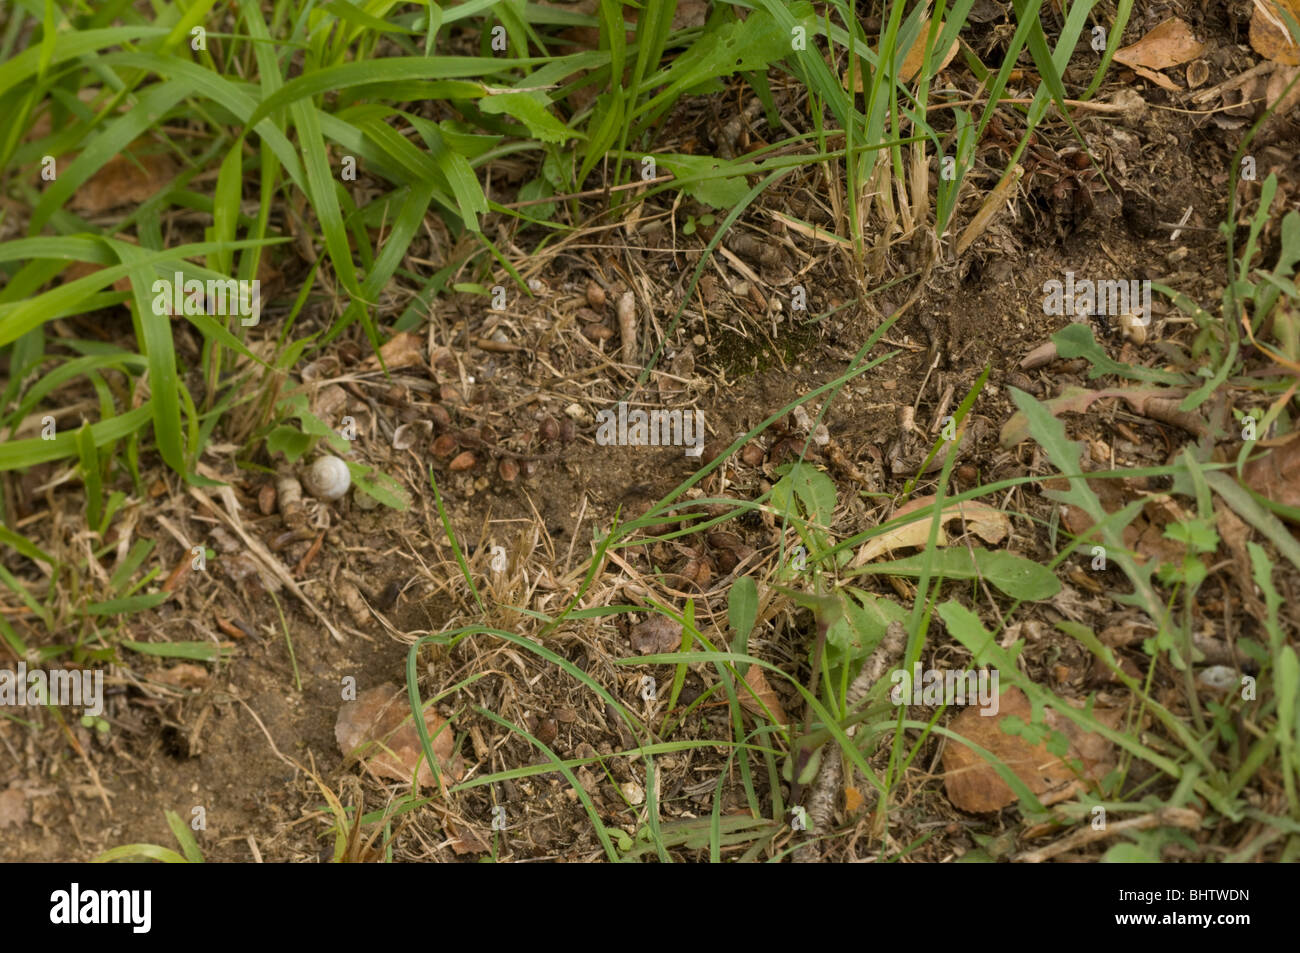 Pathway made by Messor barbarus the harvesting ant from nest to feeding plants Stock Photo